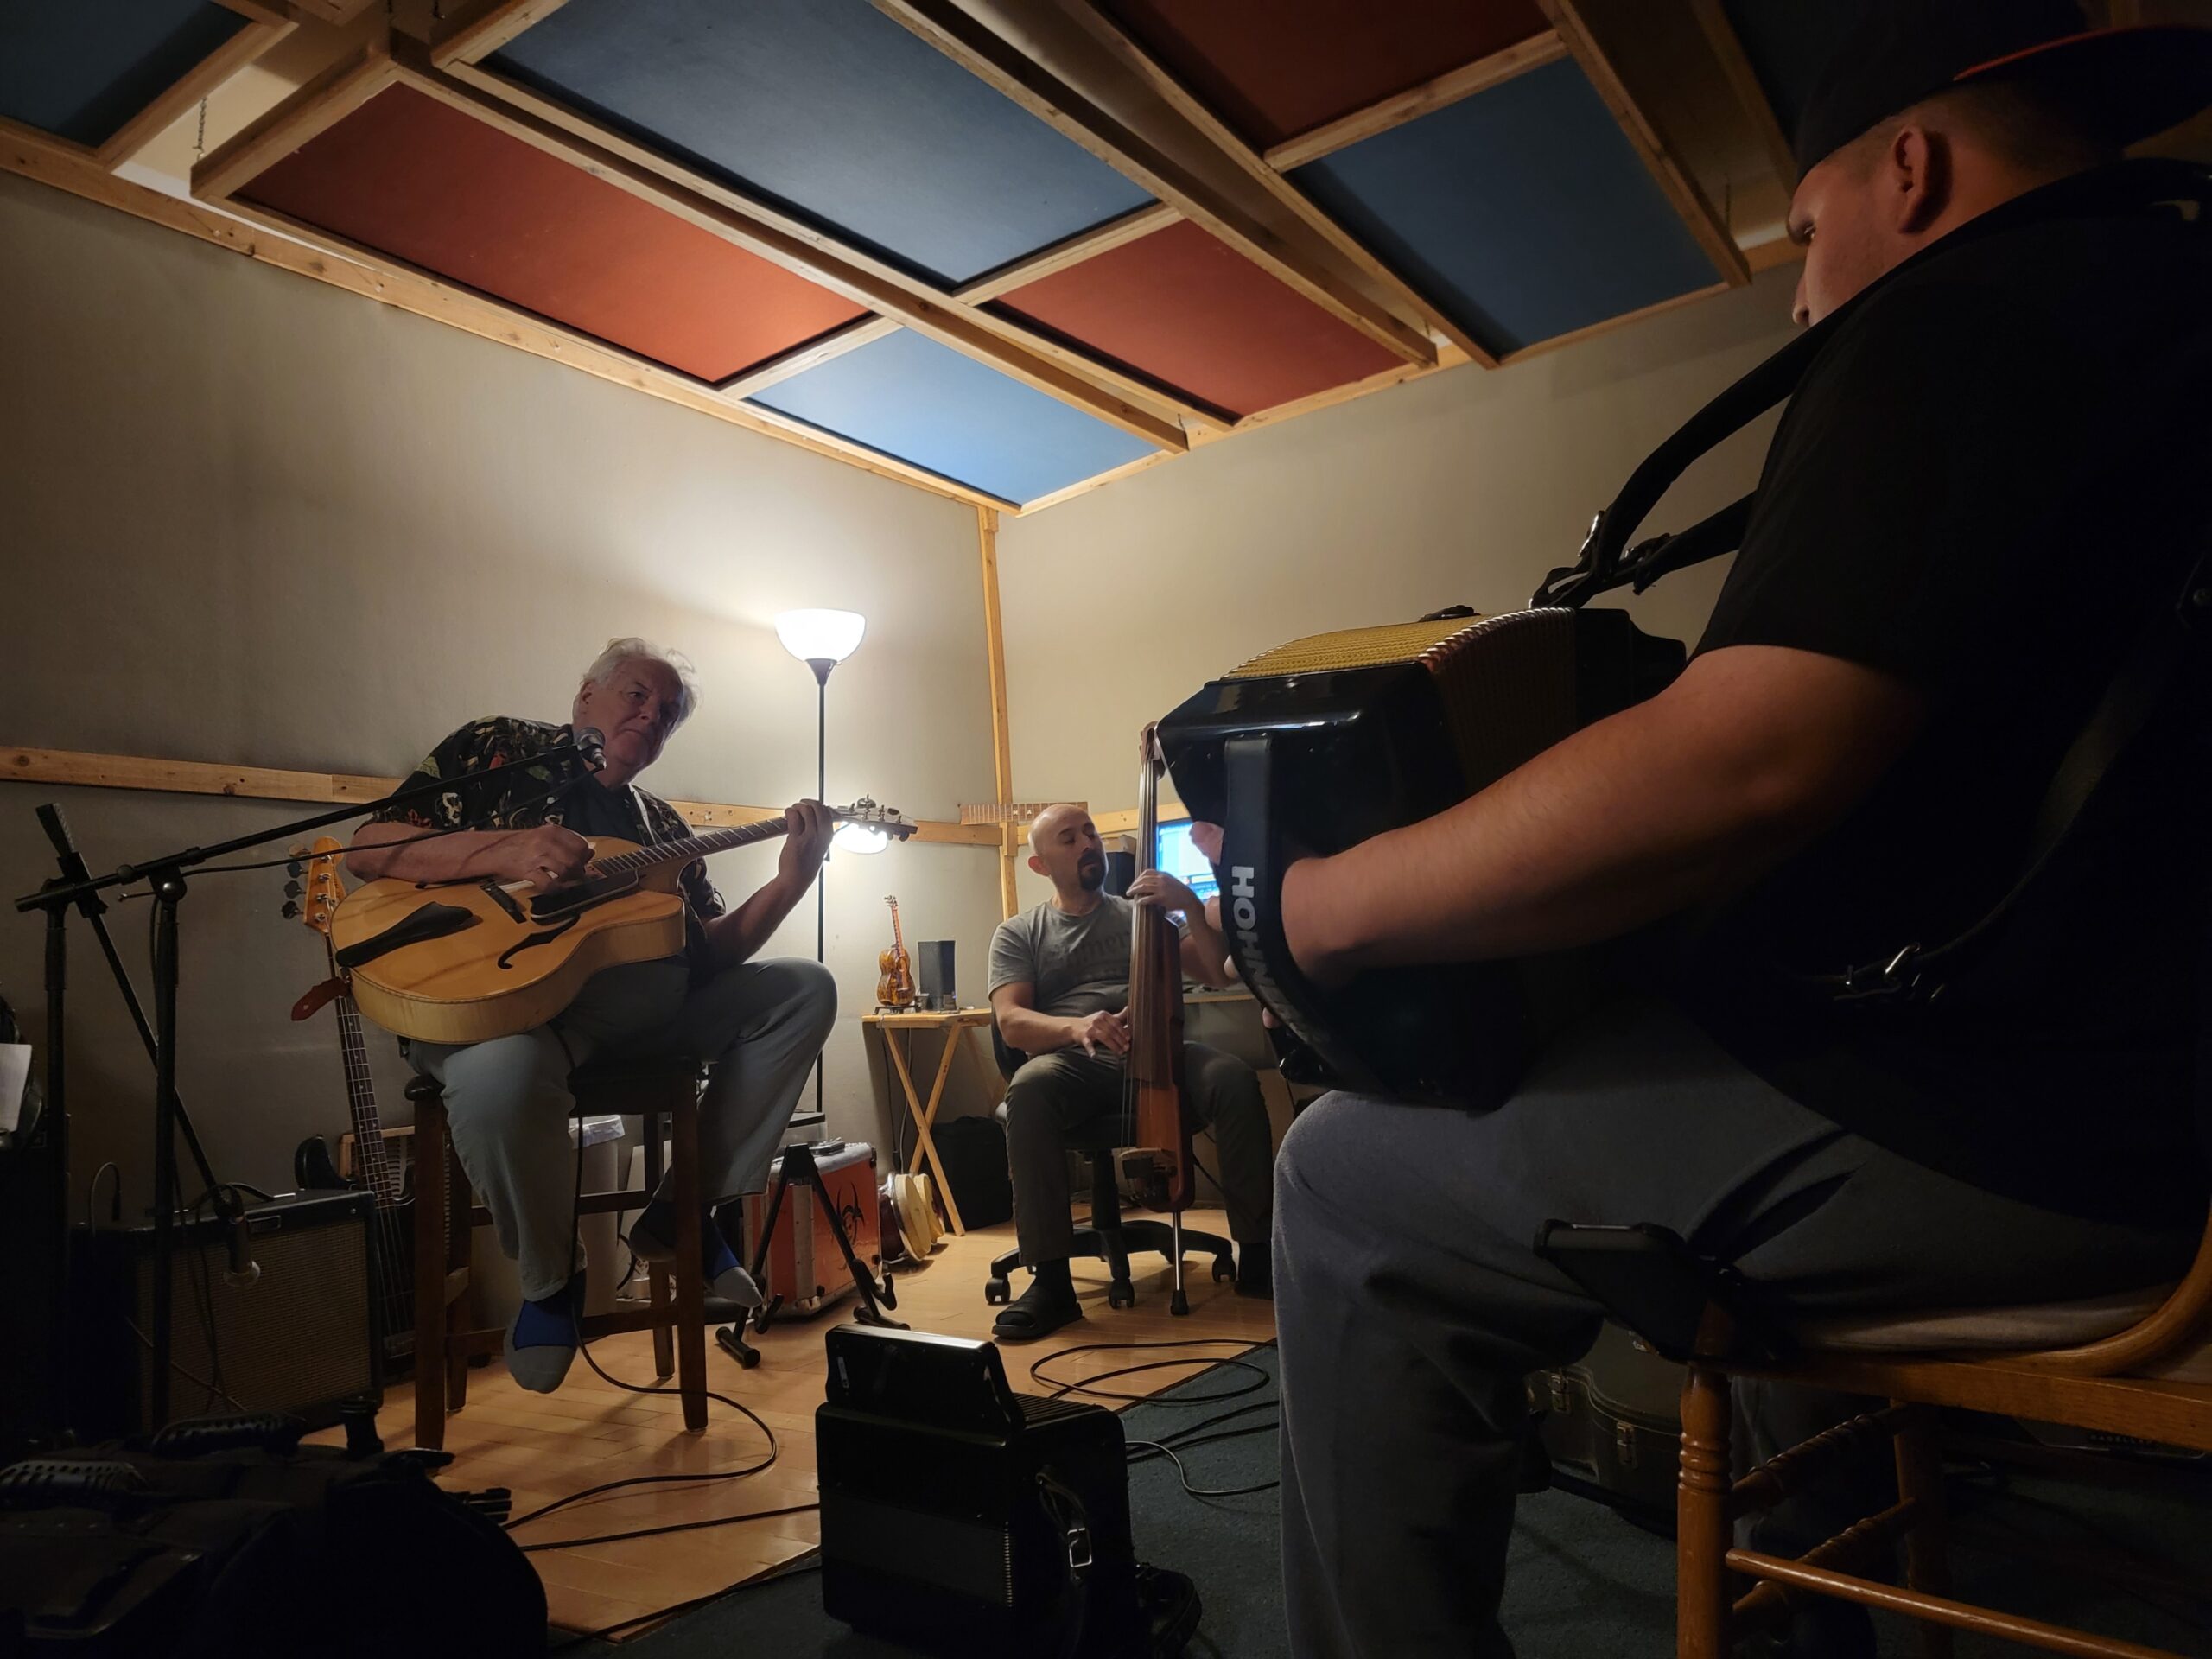 Peter Rowan plays guitar while Josh Baca plays accordion during a recording session.